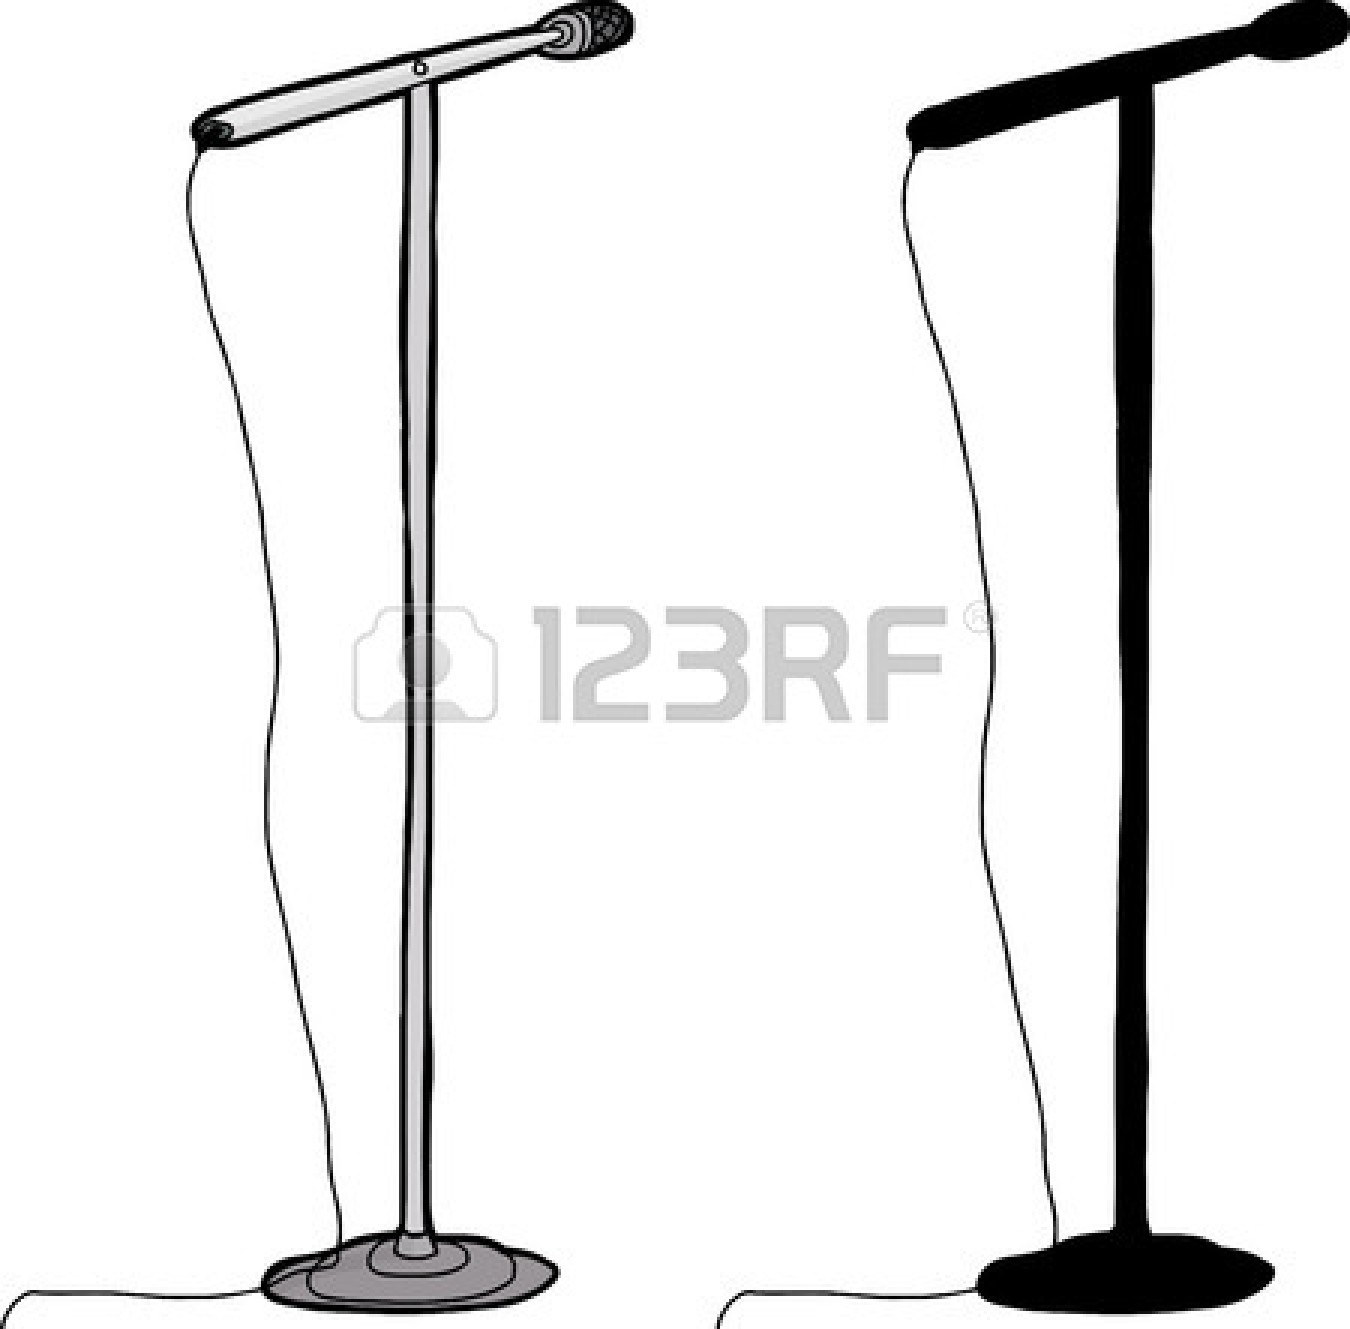 Microphone Stand Clip Art 27236134 Cartoon And Silhouette Microphone